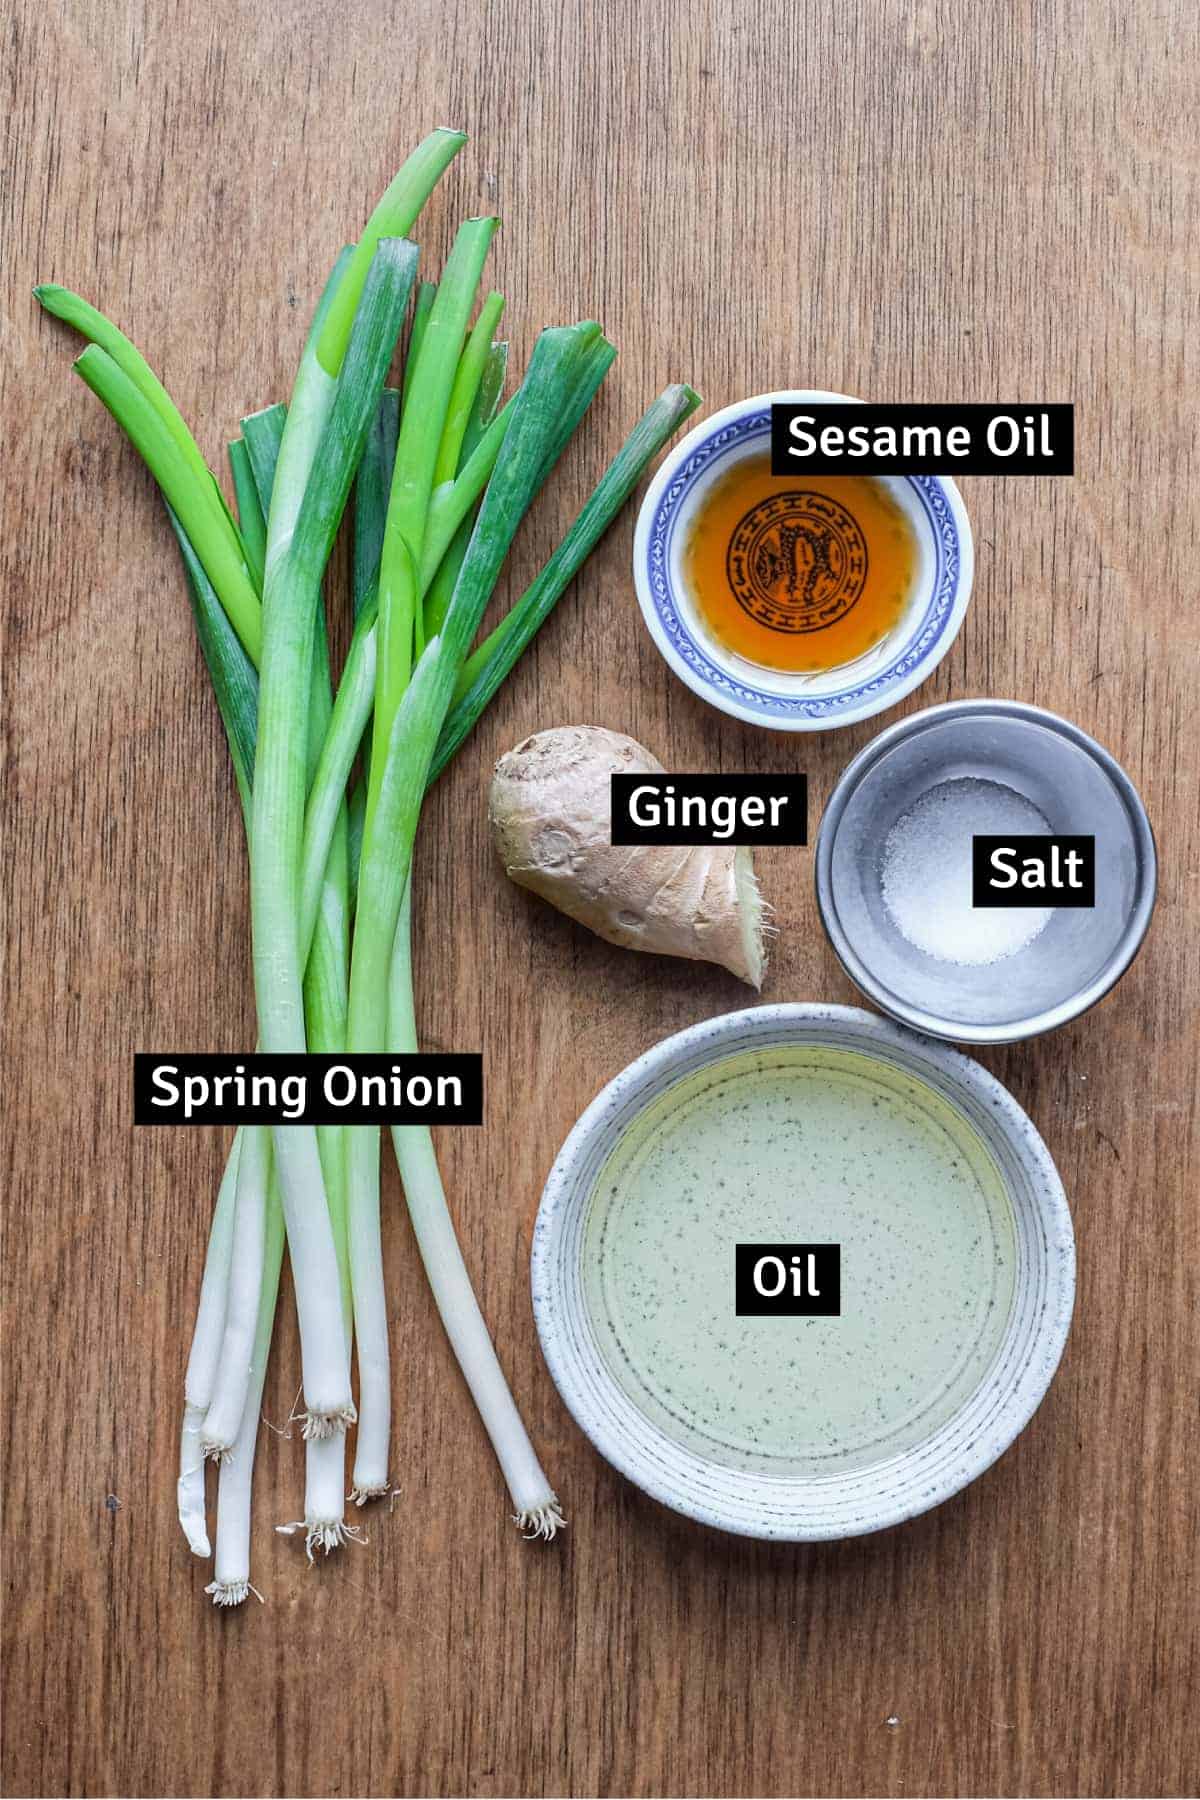 The five ingredients for Chinse Ginger Scallion Sauce: Scallions, ginger, sesame oil, peanut oil and salt.